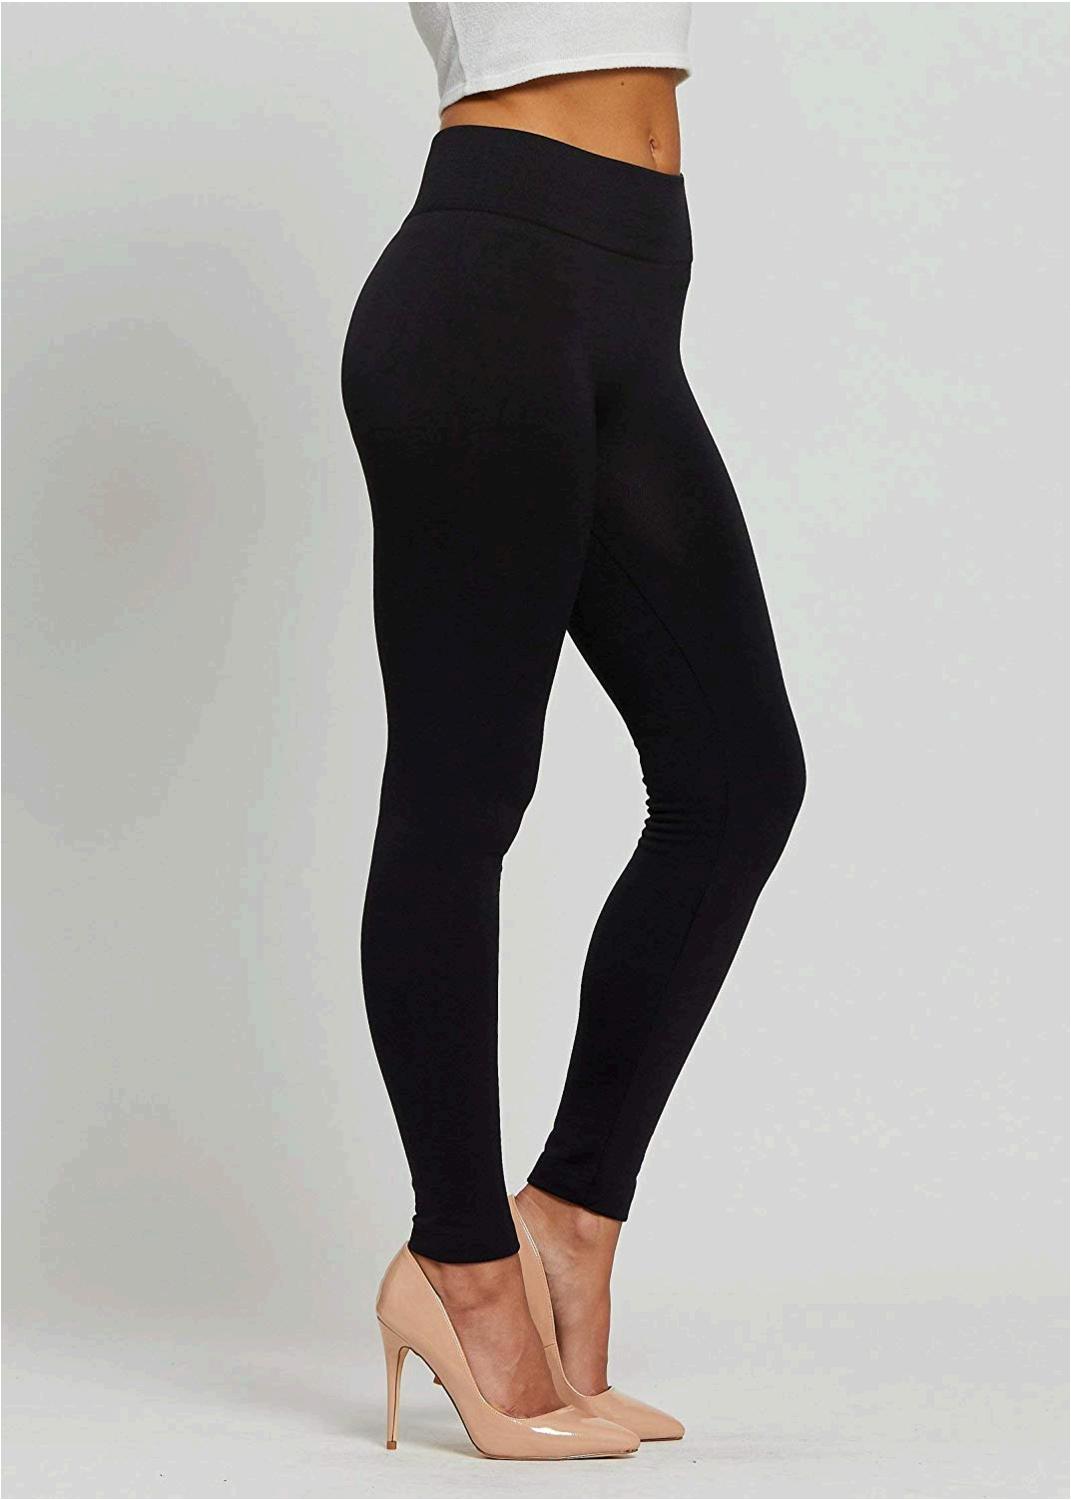 Super Soft Stretchy Leggings For Women Over 60  International Society of  Precision Agriculture